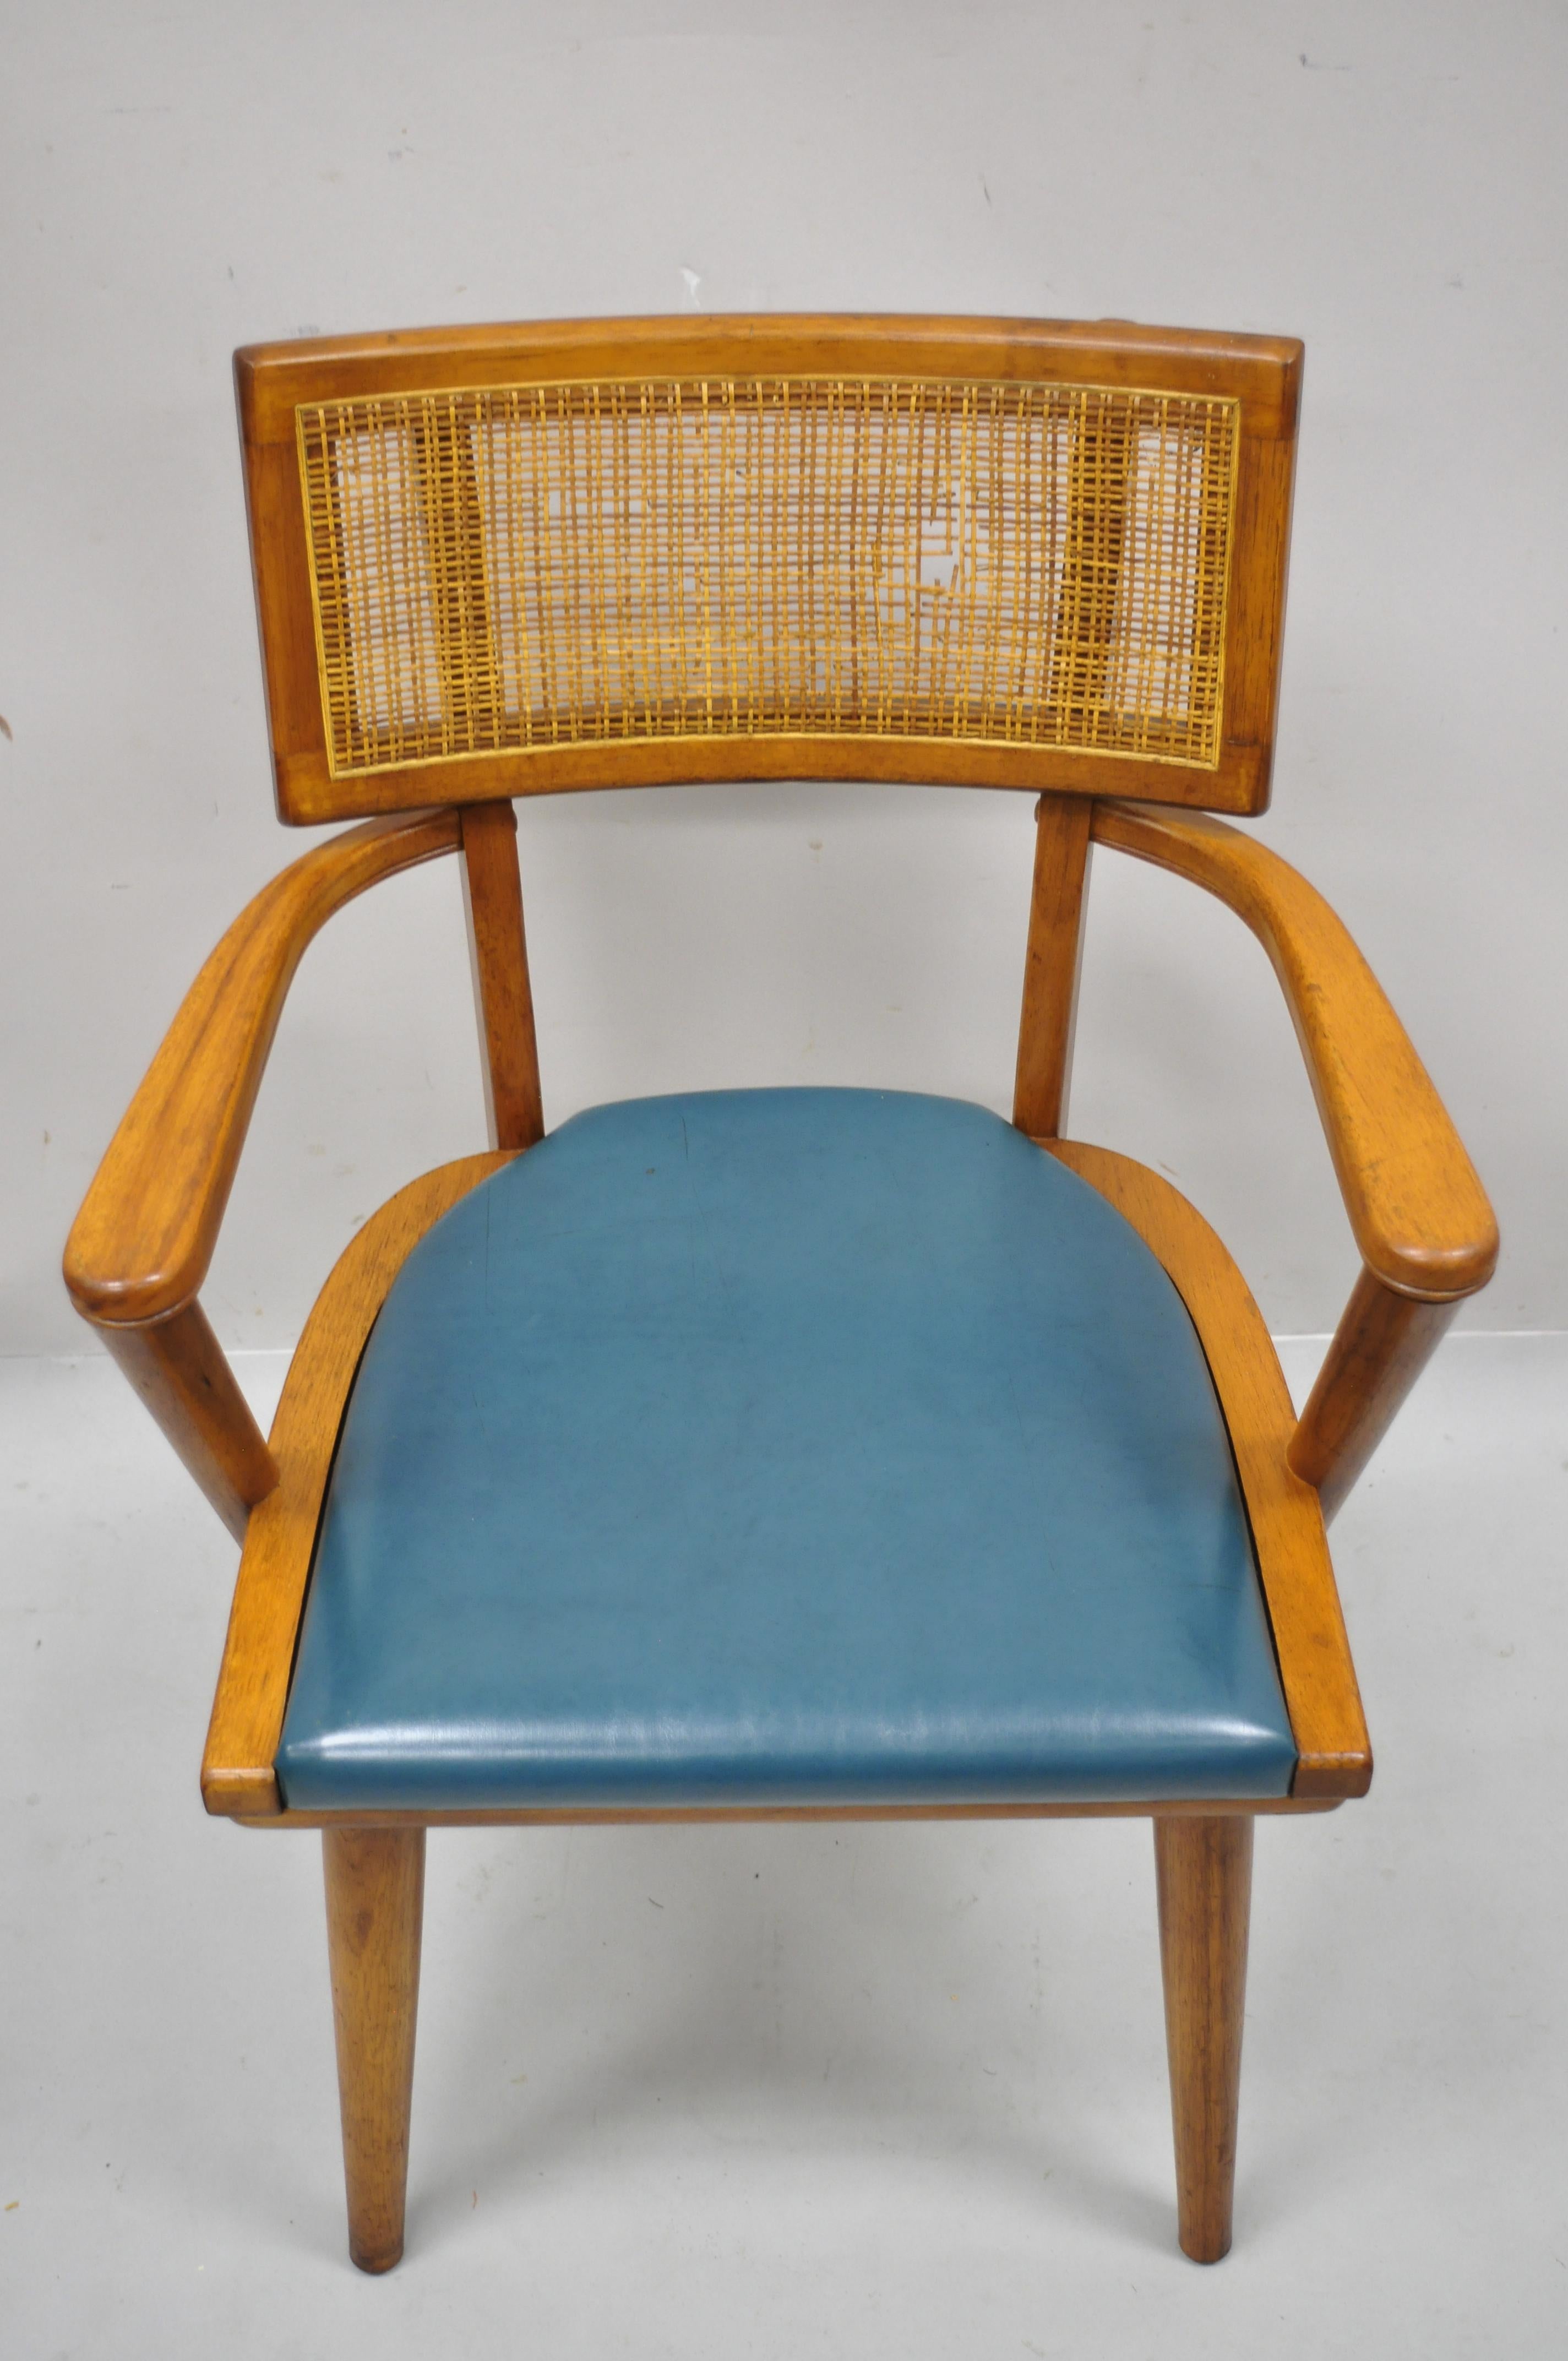 The Boling Changebak Chair Walnut Cane Back Mid Century by Boling Chair Co. 'A' 3